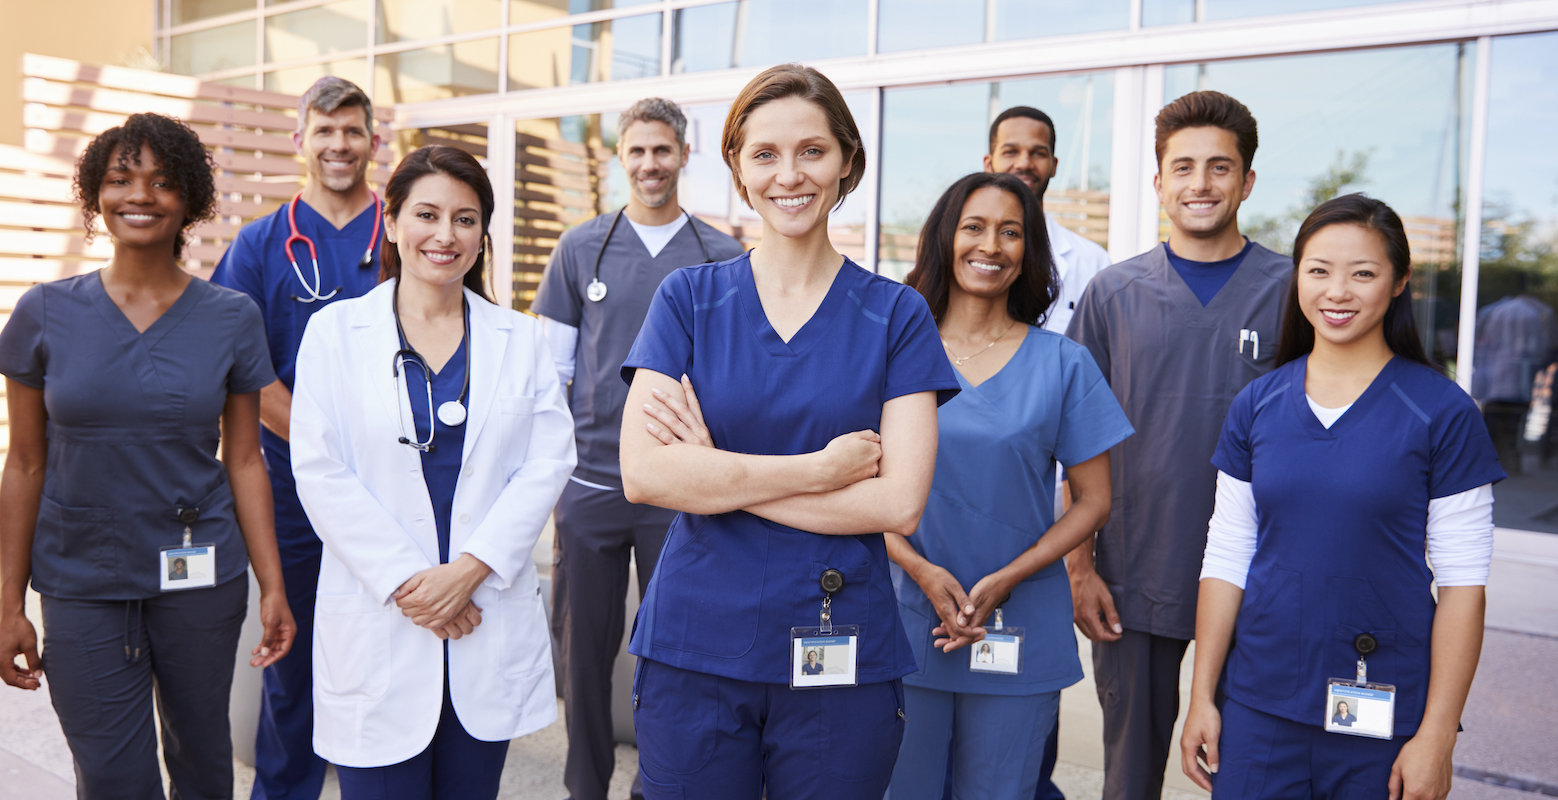 team-of-healthcare-workers-with-id-badges-outside.jpg